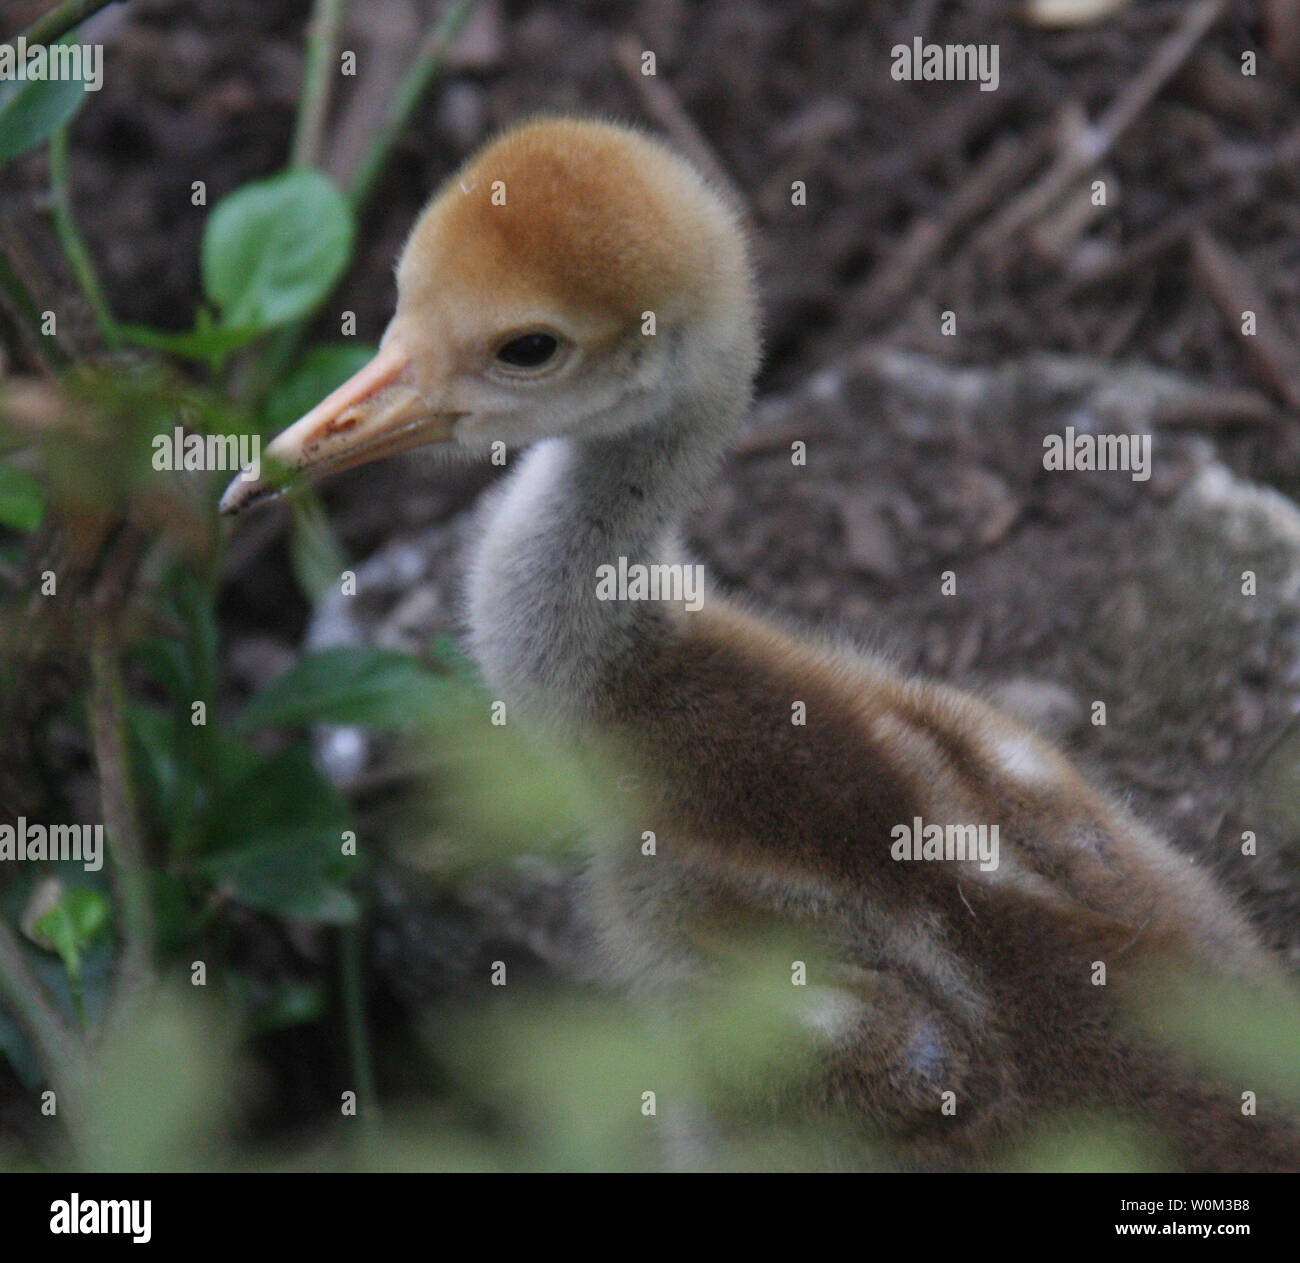 A white-naped crane chick which hatched on April 29 at the Wildlife Conservation Society's (WSC) Central Park Zoo made its public debut on May 24, 2017. The WCS breeds white-naped cranes as part of the Species Survival Plan (SSP), a cooperative breeding program designed to enhance the genetic viability of animal populations in zoos and aquariums accredited by the Association of Zoos and Aquariums. White-naped cranes are a migratory species native to East Asia including China, Russia, Japan, North and South Korea, and Mongolia. They are classified as 'Vulnerable' by the International Union for Stock Photo